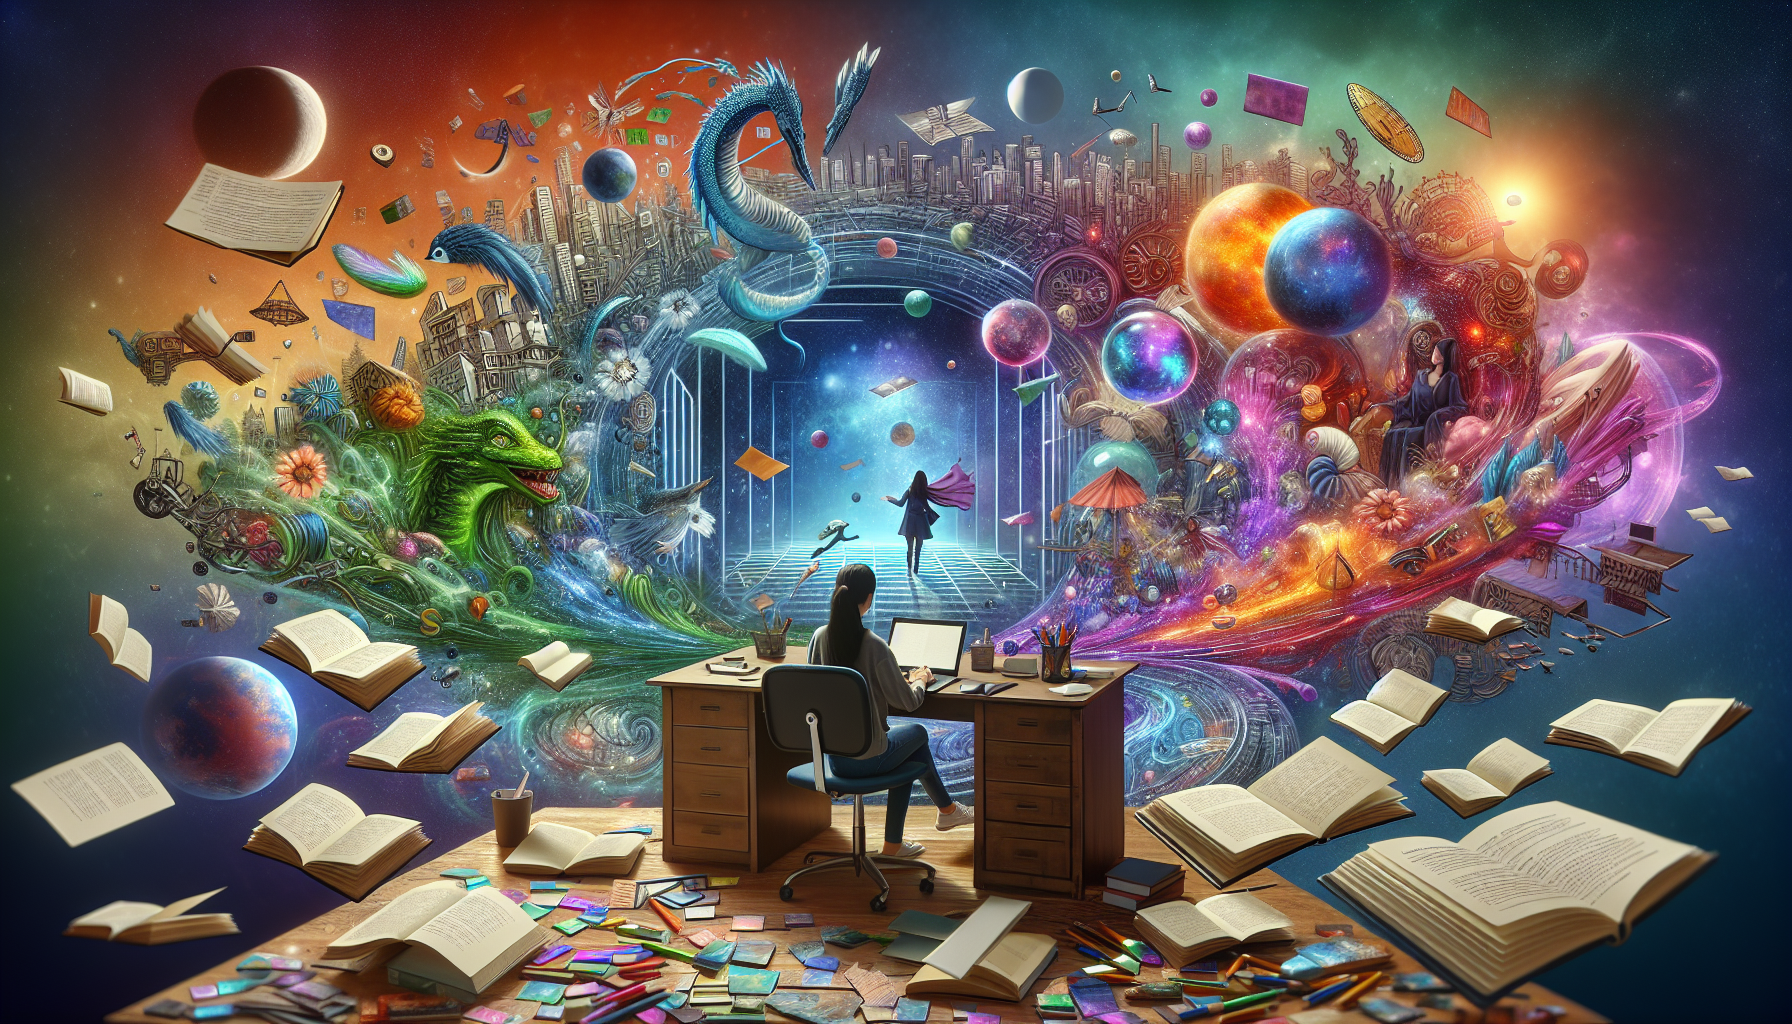 An artistically vibrant and dreamlike workspace filled with floating books, screenplay drafts, and glowing screens, depicting a young female screenwriter, Eris Qian, surrounded by portals showing vari